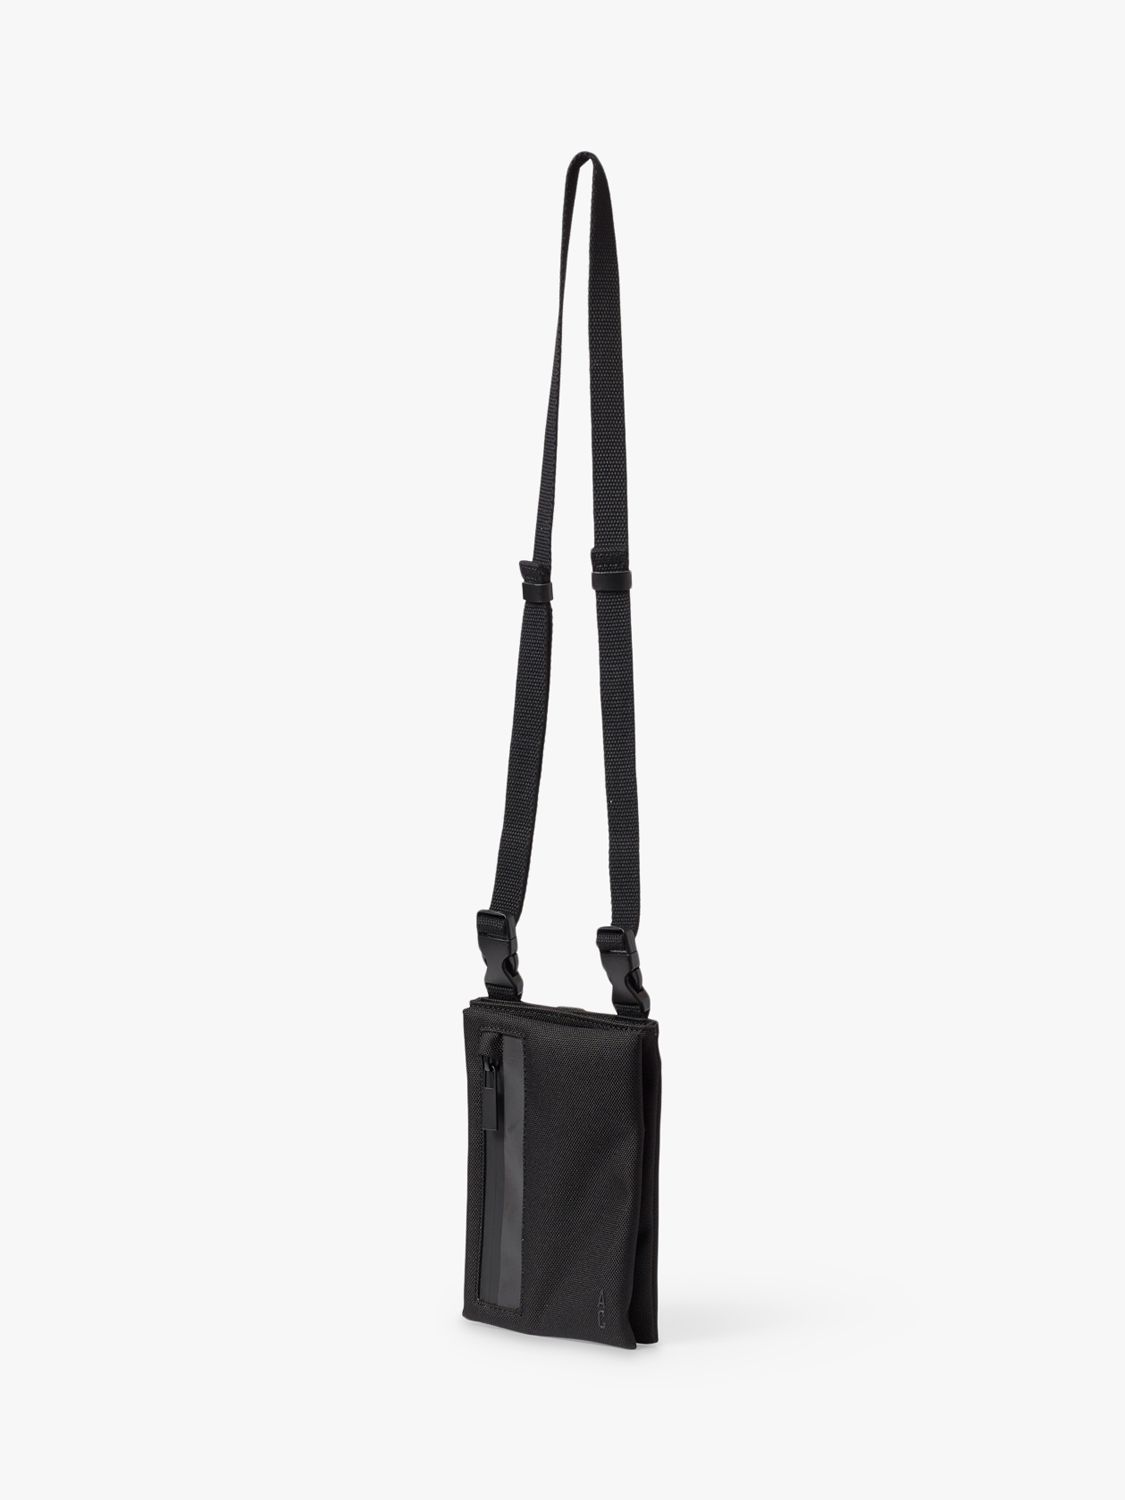 Buy Ally Capellino Hoban Travel Cycle Phone Pouch Bag Online at johnlewis.com